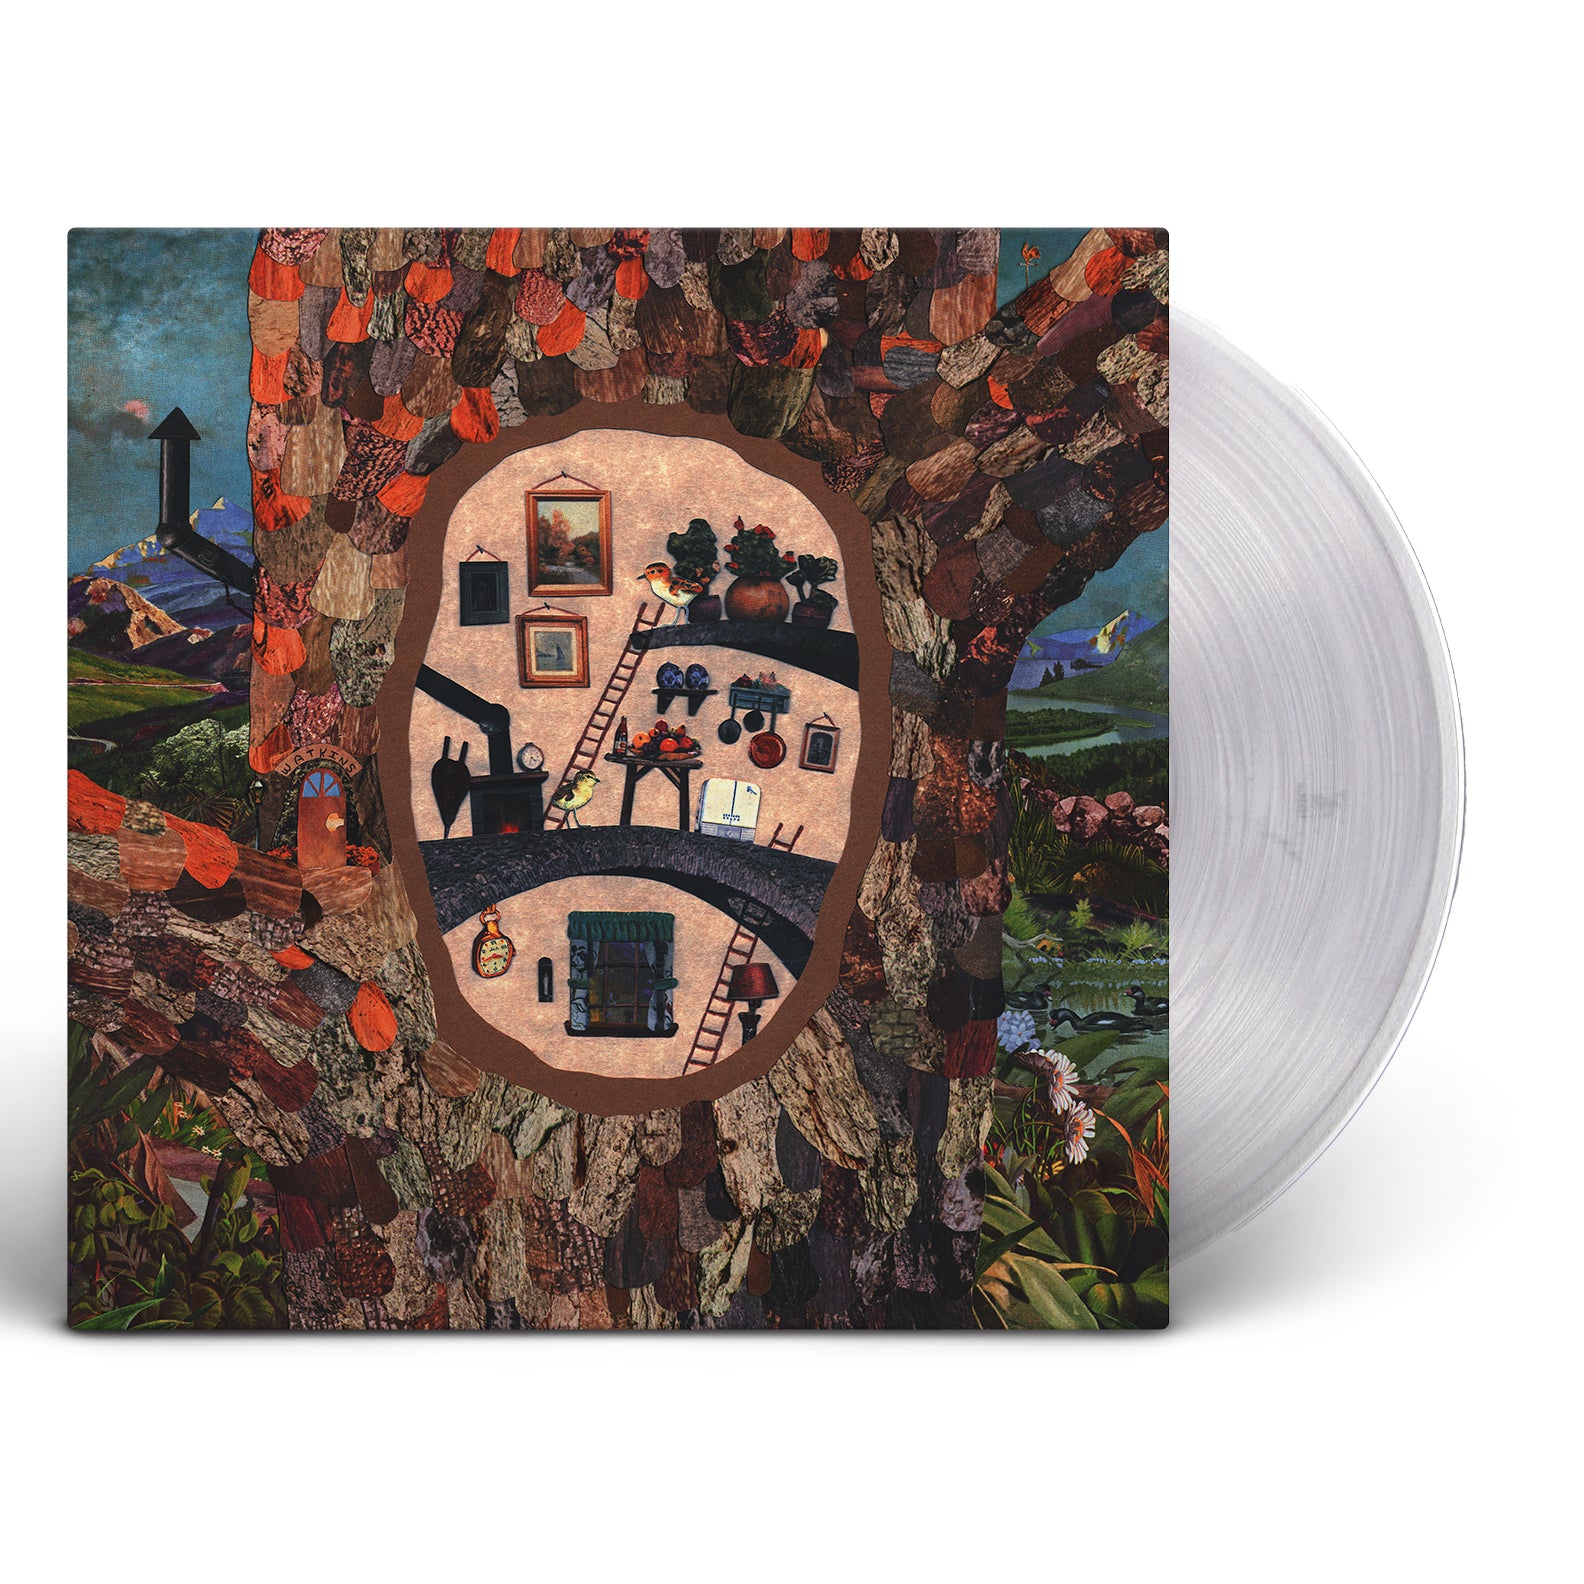 Sara Watkins - Under the Pepper Tree [Cyber Monday New West Exclusive Color Vinyl]